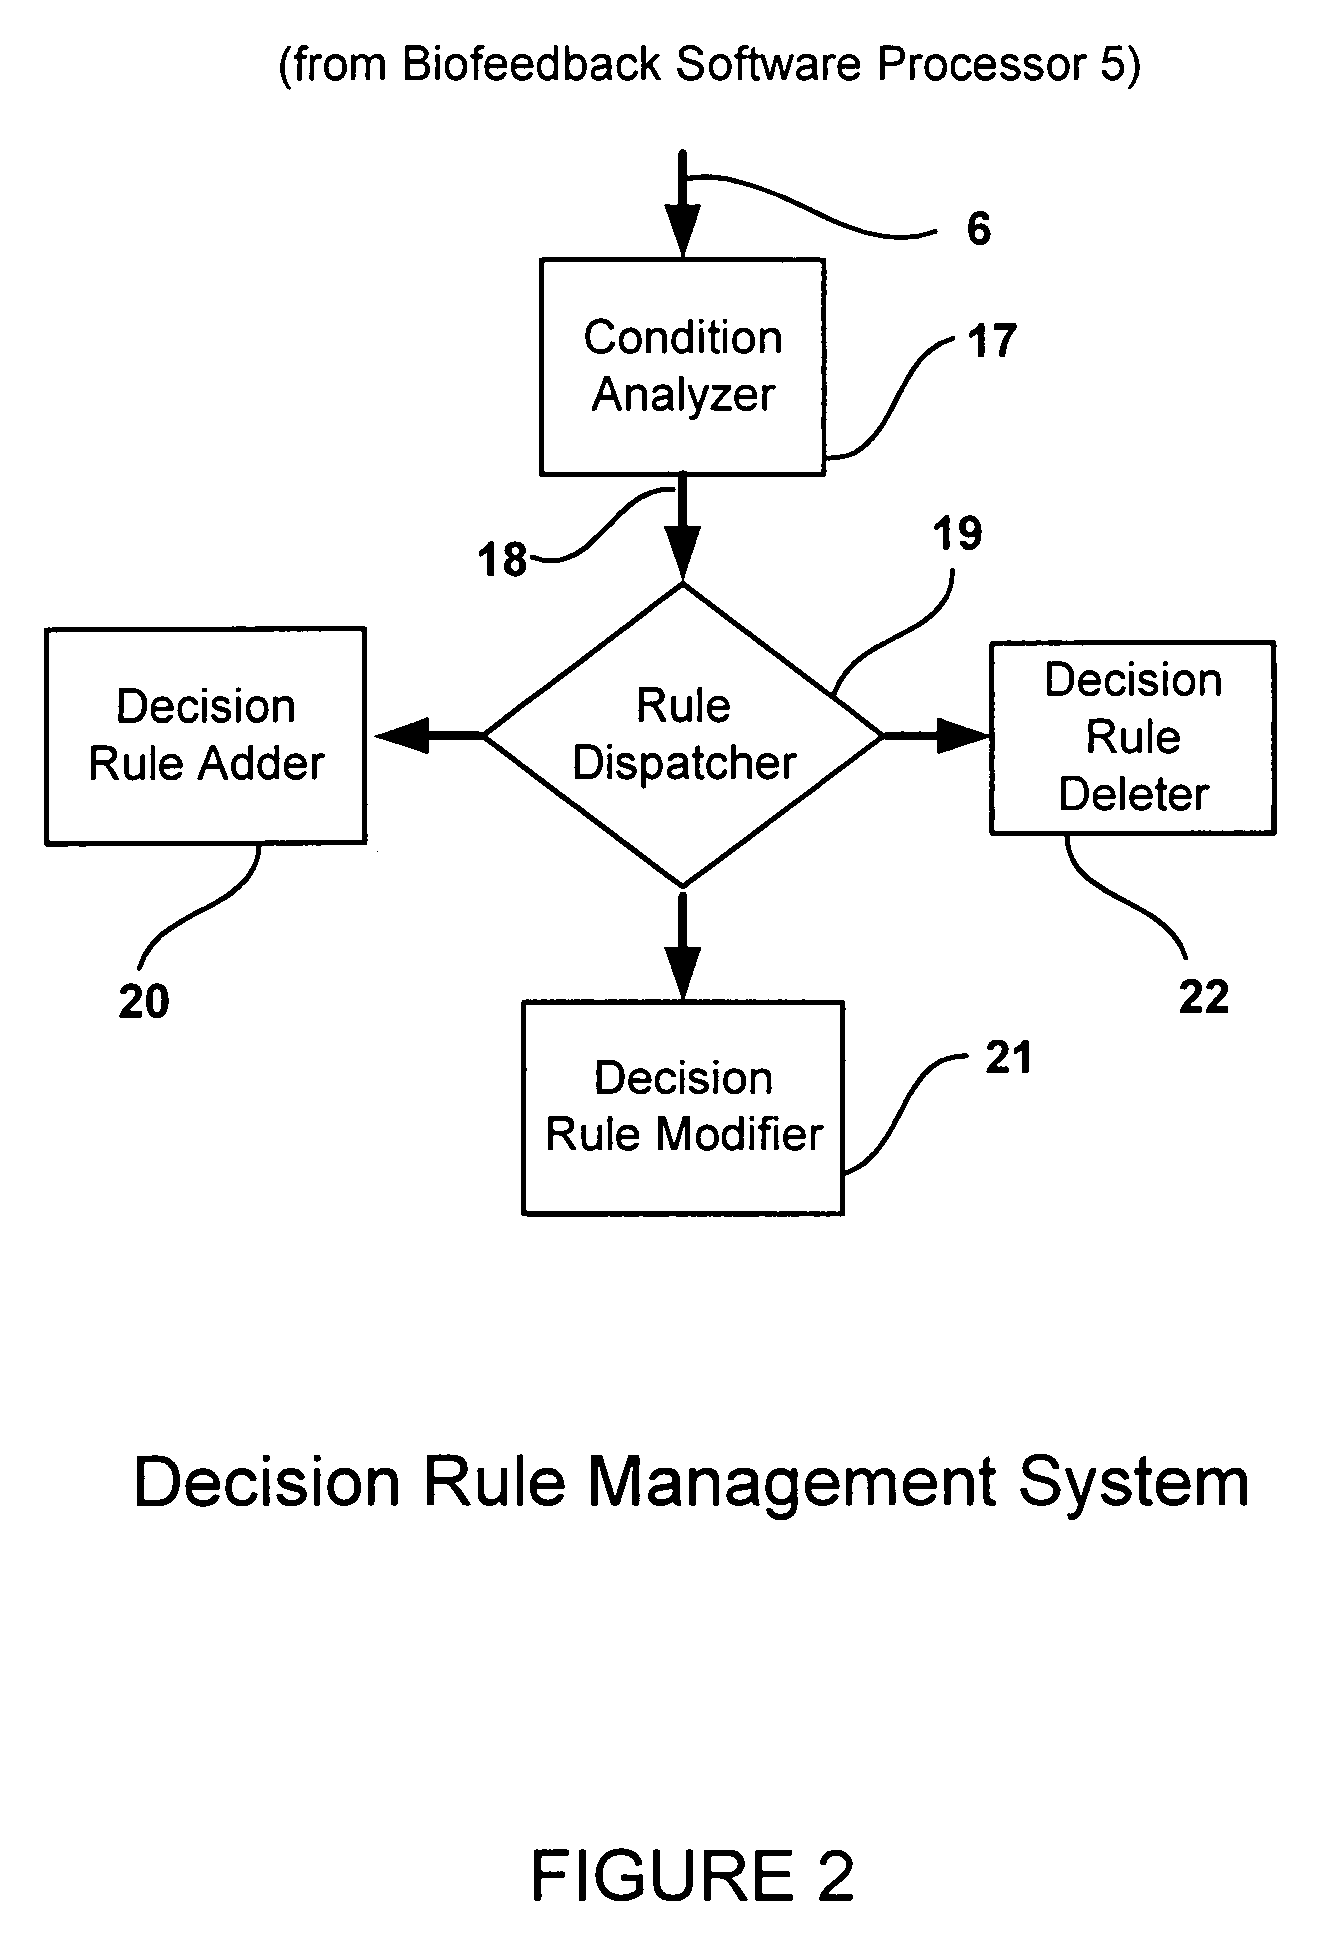 System and method for incorporating artificial intelligence into a biofeedback training system